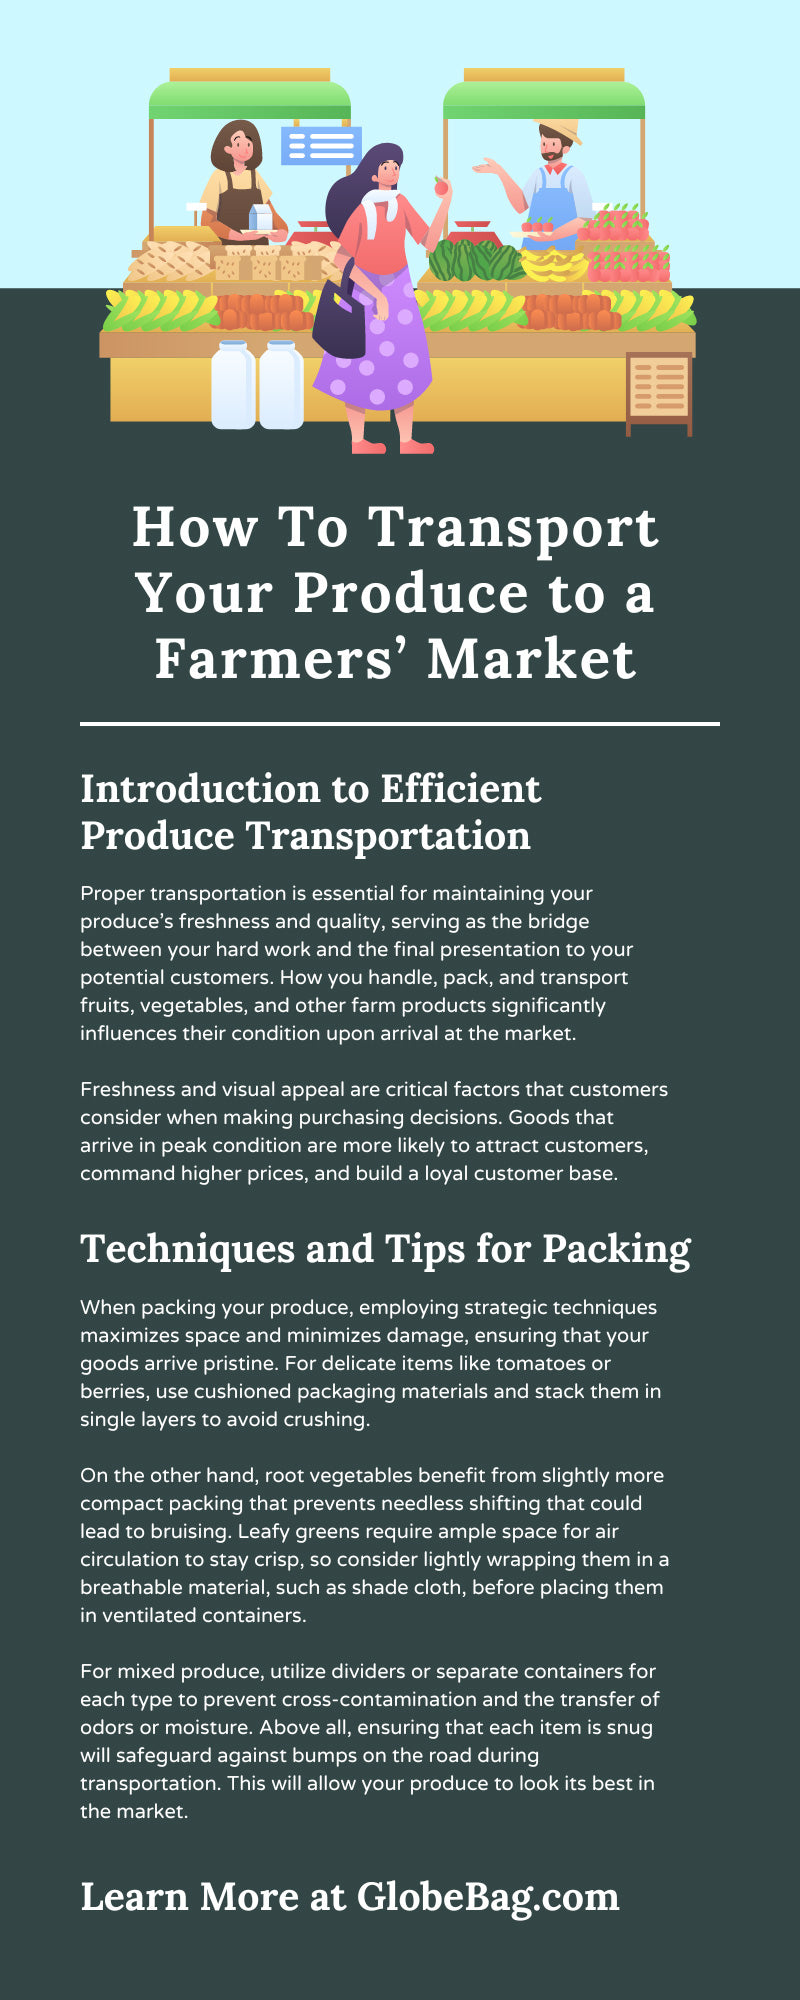 How To Transport Your Produce to a Farmers’ Market